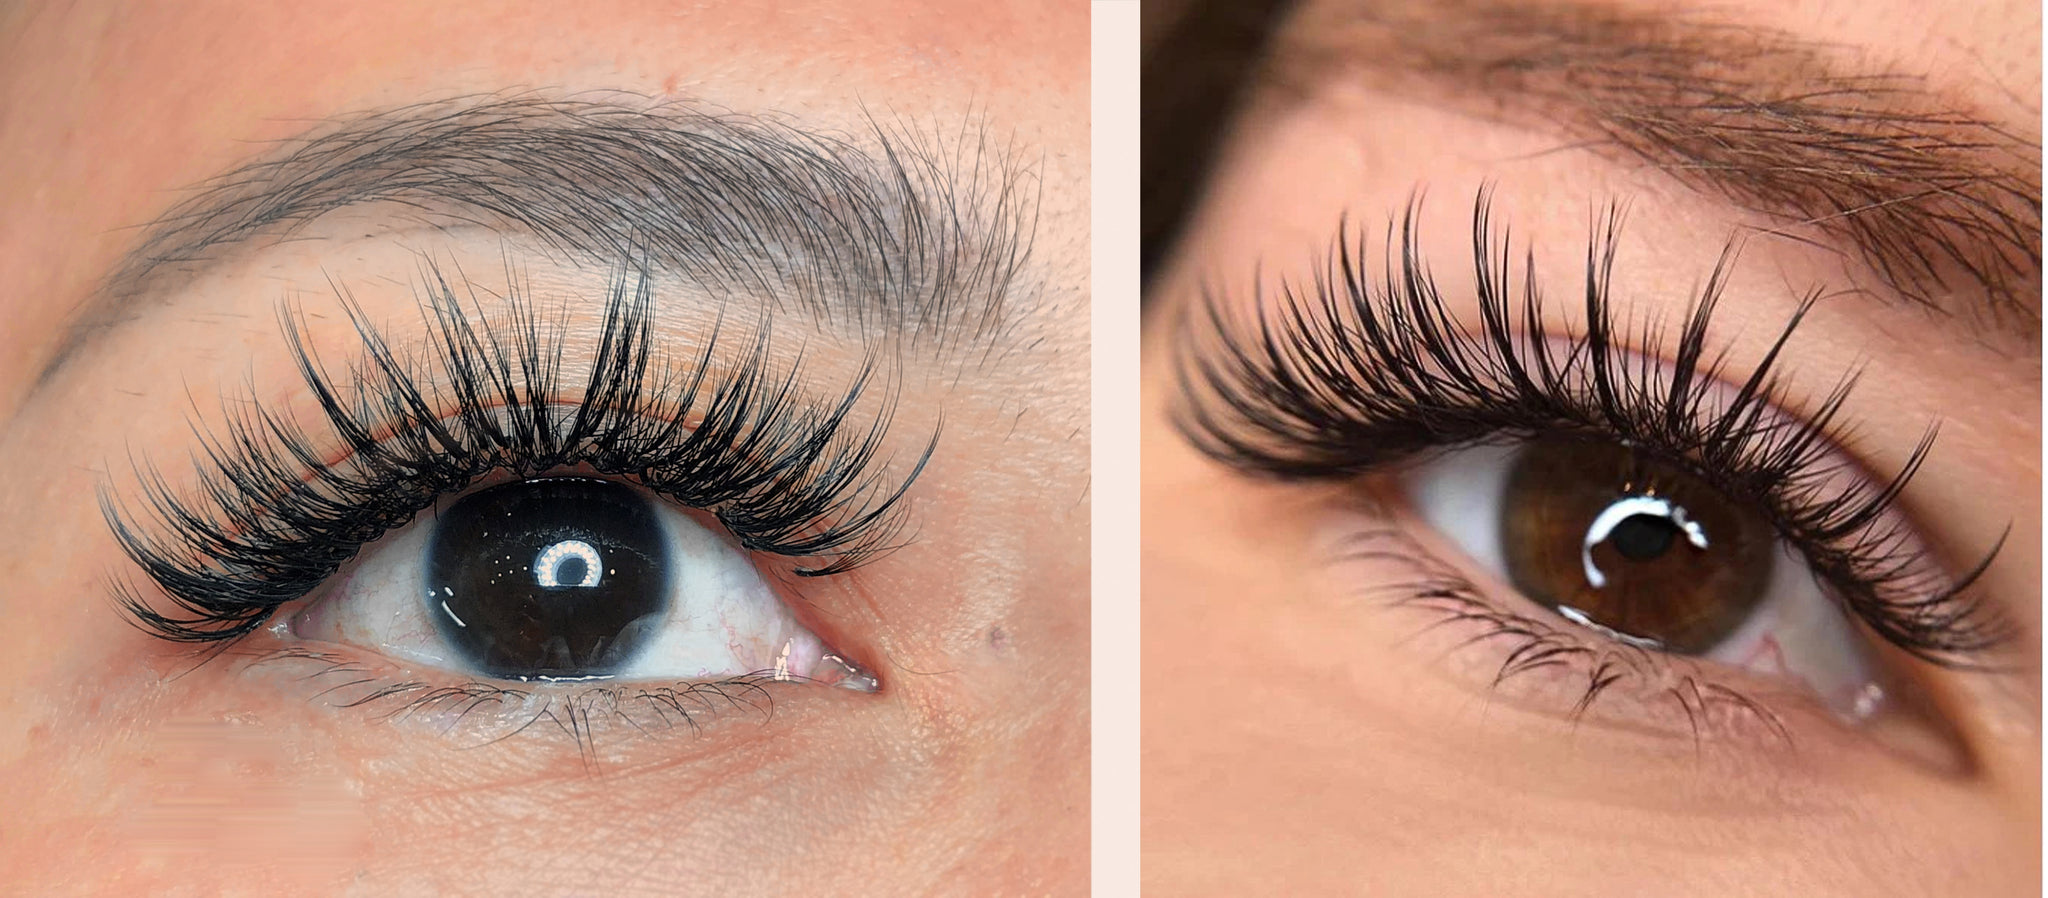 An image showcasing the outcome of wispy lash extensions. The lashes appear staggered and textured, featuring varying lengths and wispy ends, creating a soft and feathery effect for a natural yet alluring look.